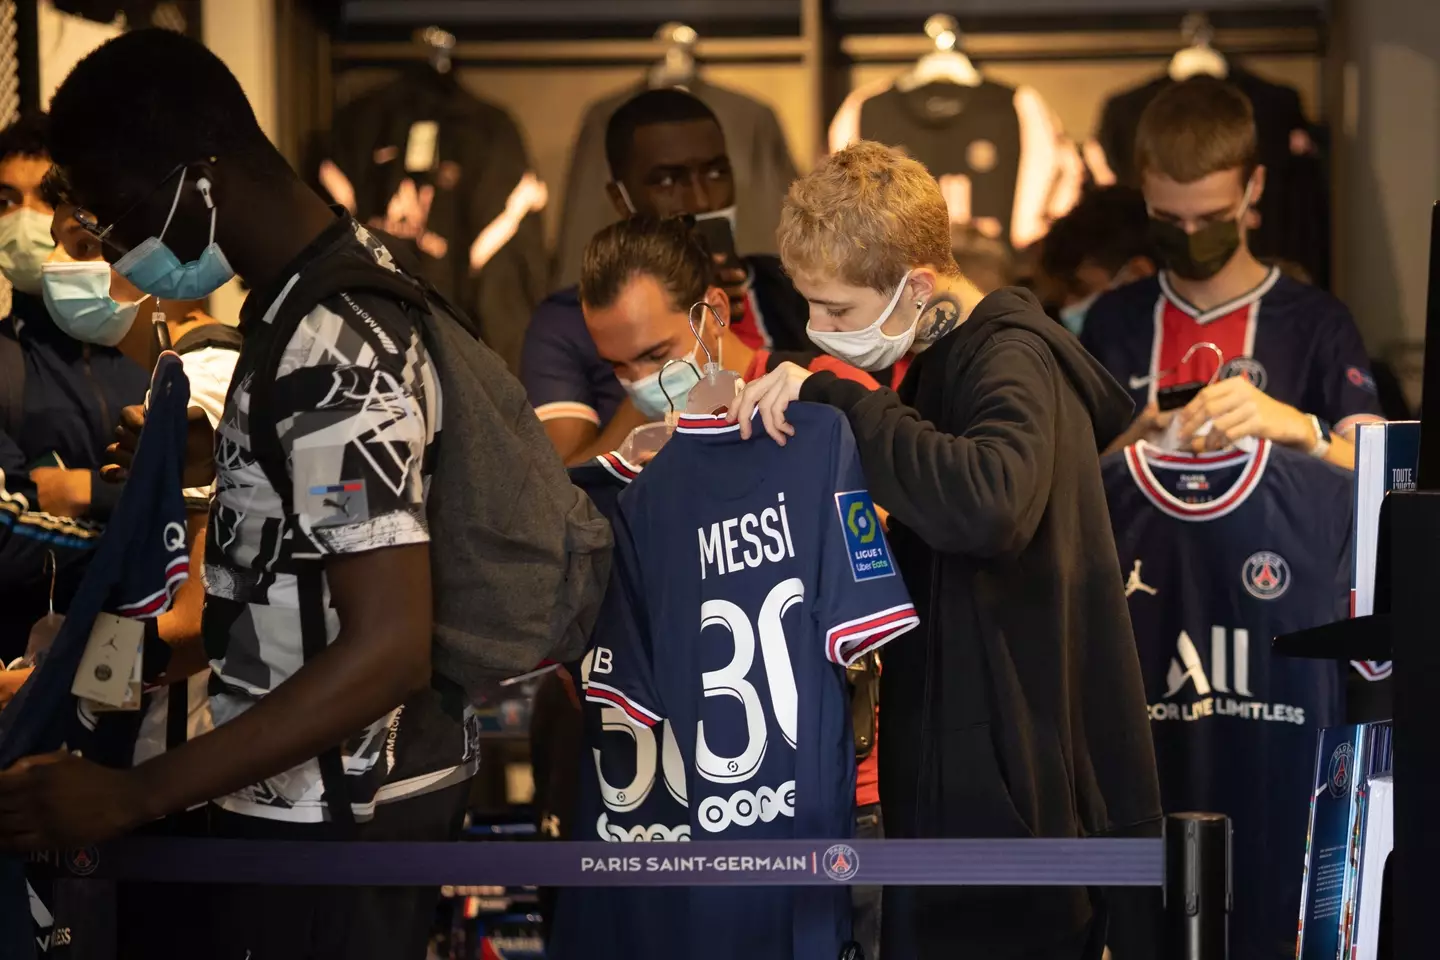 Plenty of PSG fans have already got their hands on a shirt. Image: PA Images